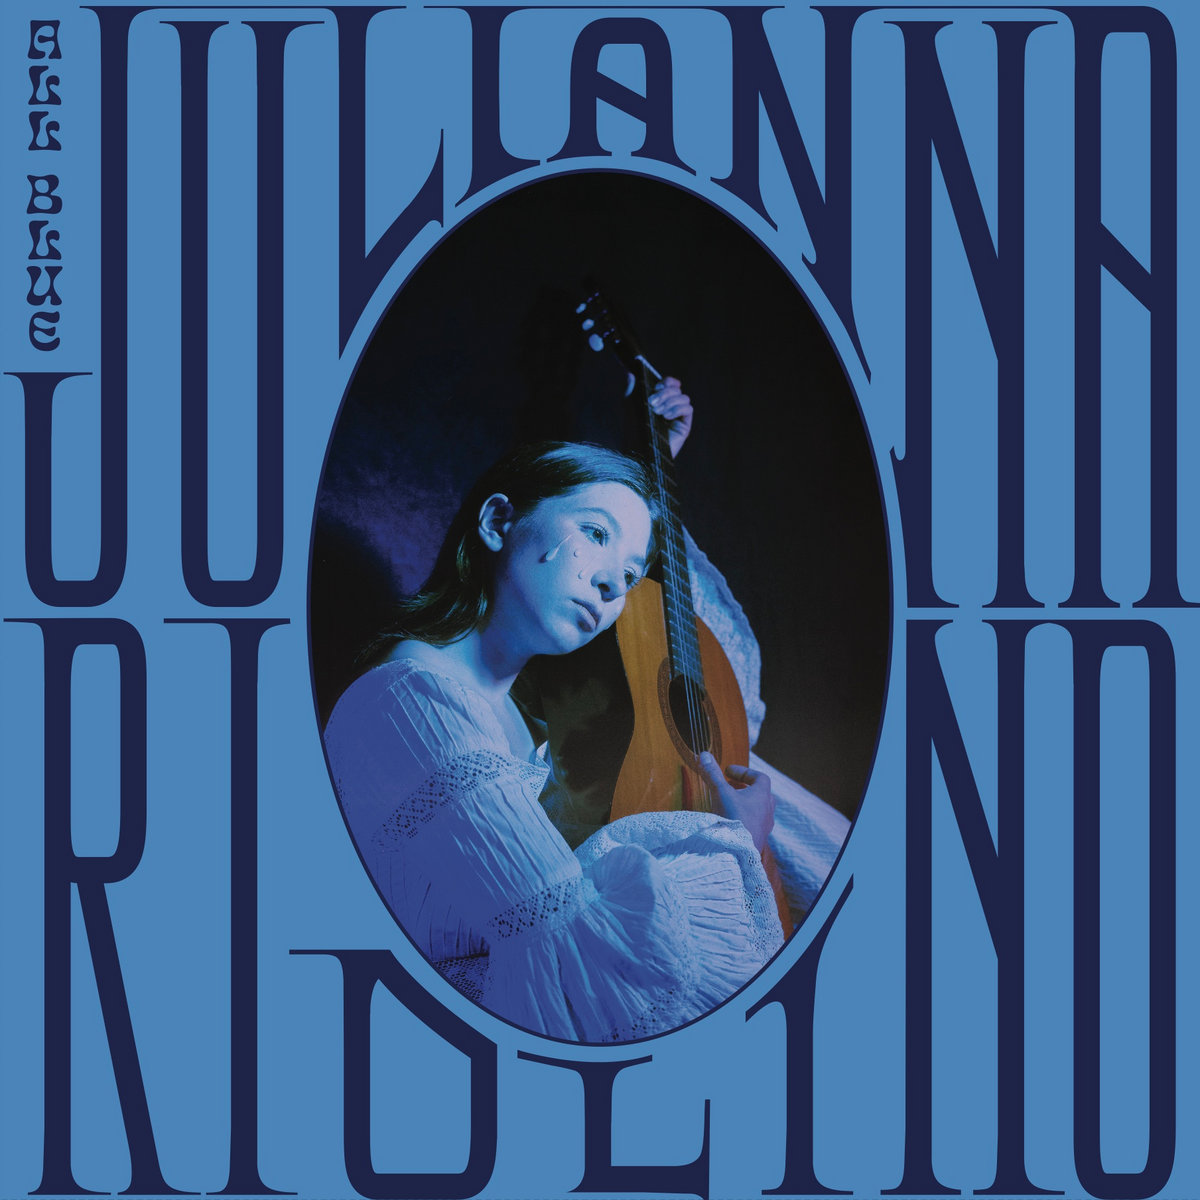 #nowplaying @jrjuliannasings - Long Feeling. Playing @BronsonTheatre on March 9th! with @ruralalberta @youvechangedrec @spectrasonic ticketweb.ca/event/the-rura…